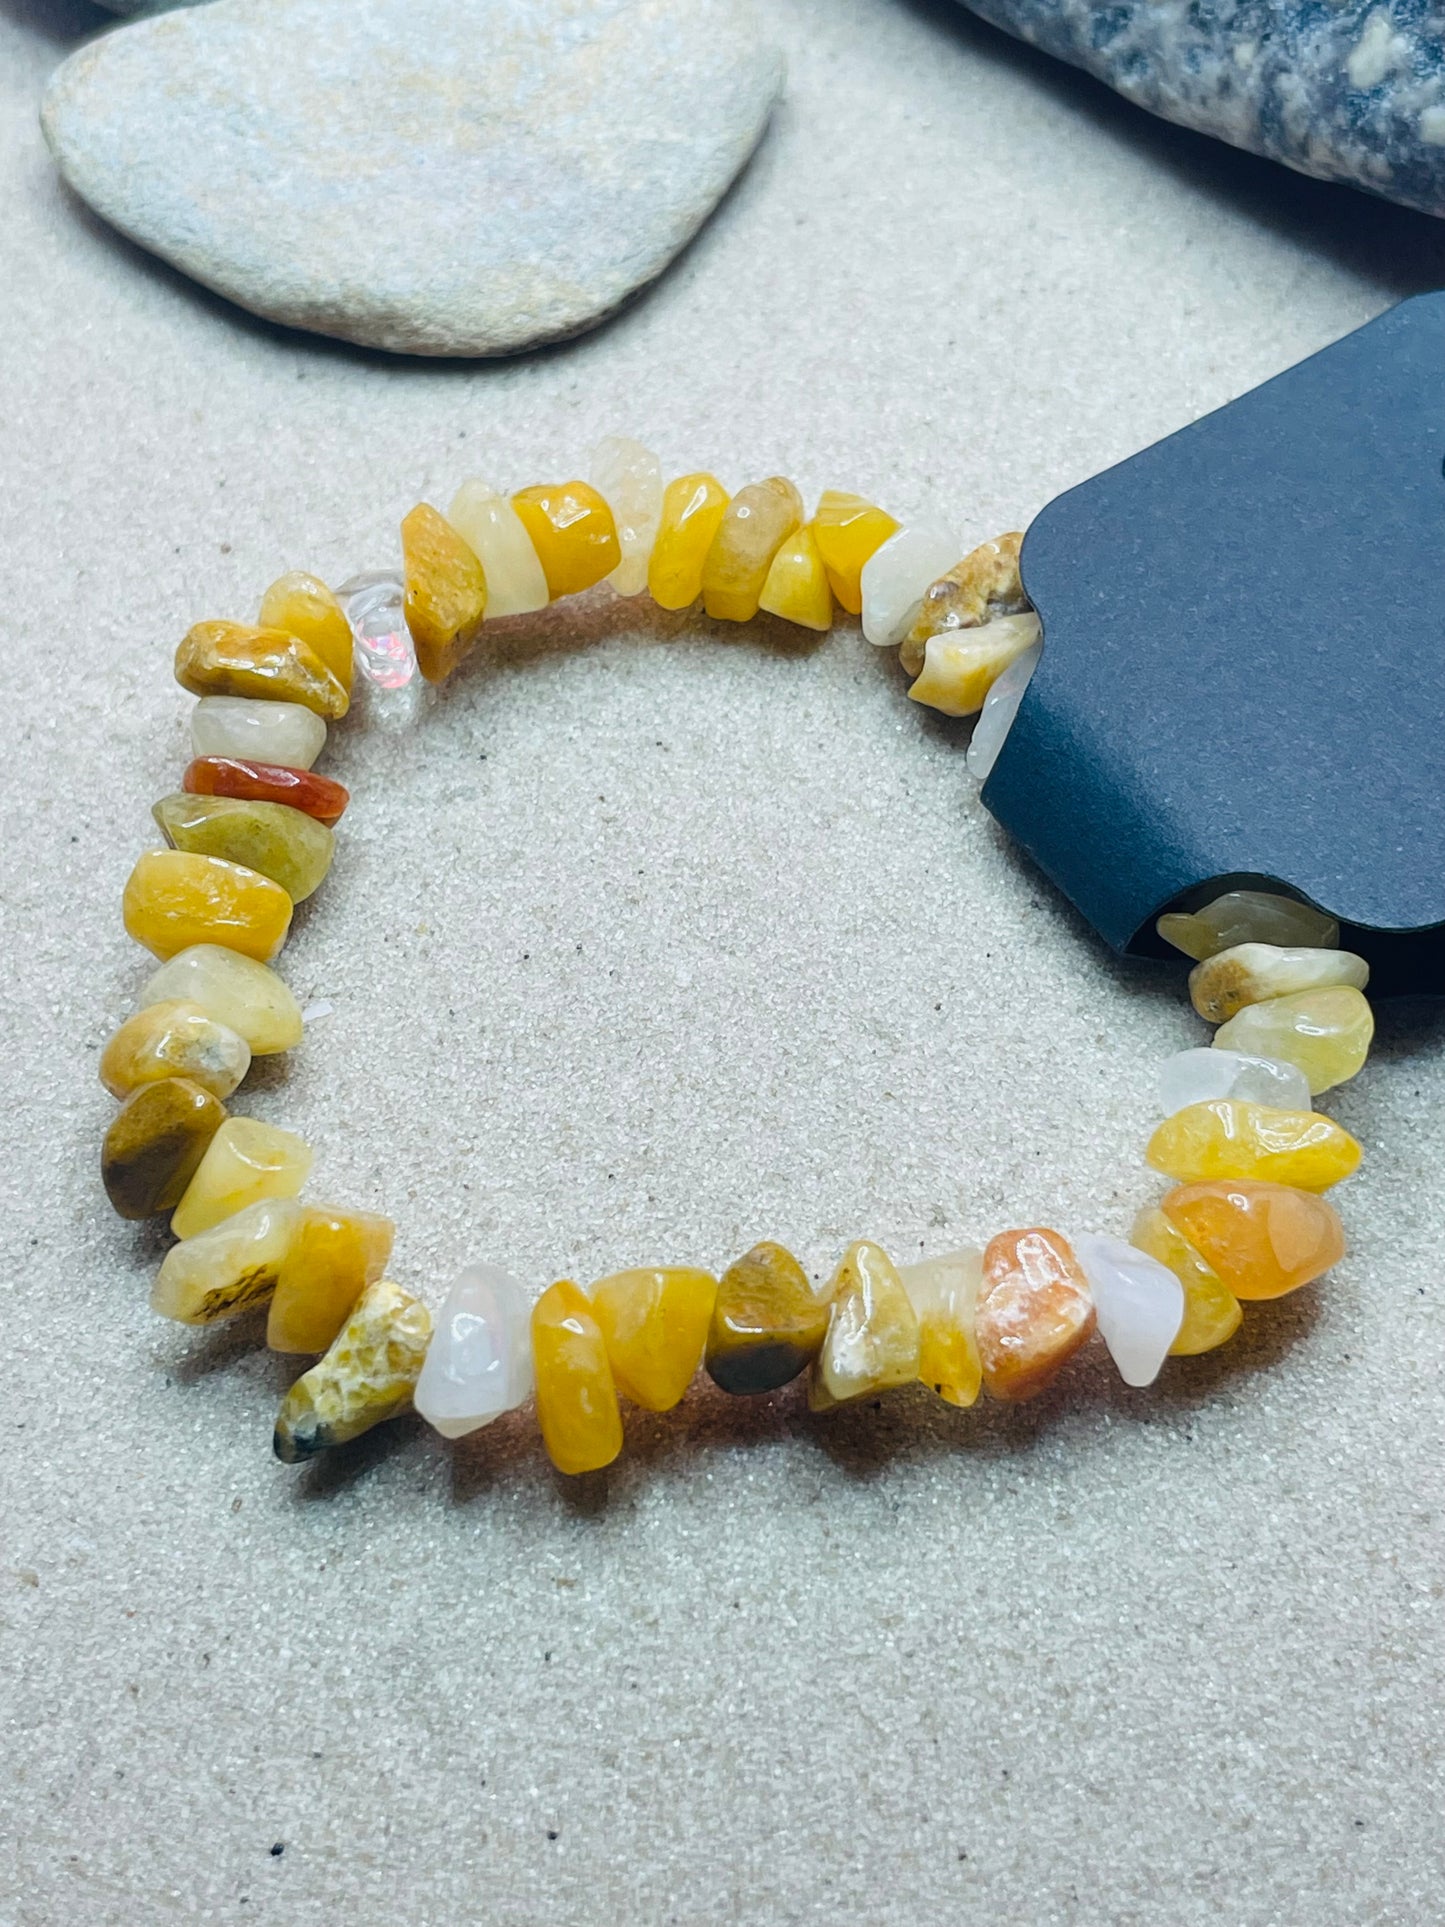 "Tewynnow" Dunes Yellow Jade Chip Bead Bracelet - Fatigue and Stress